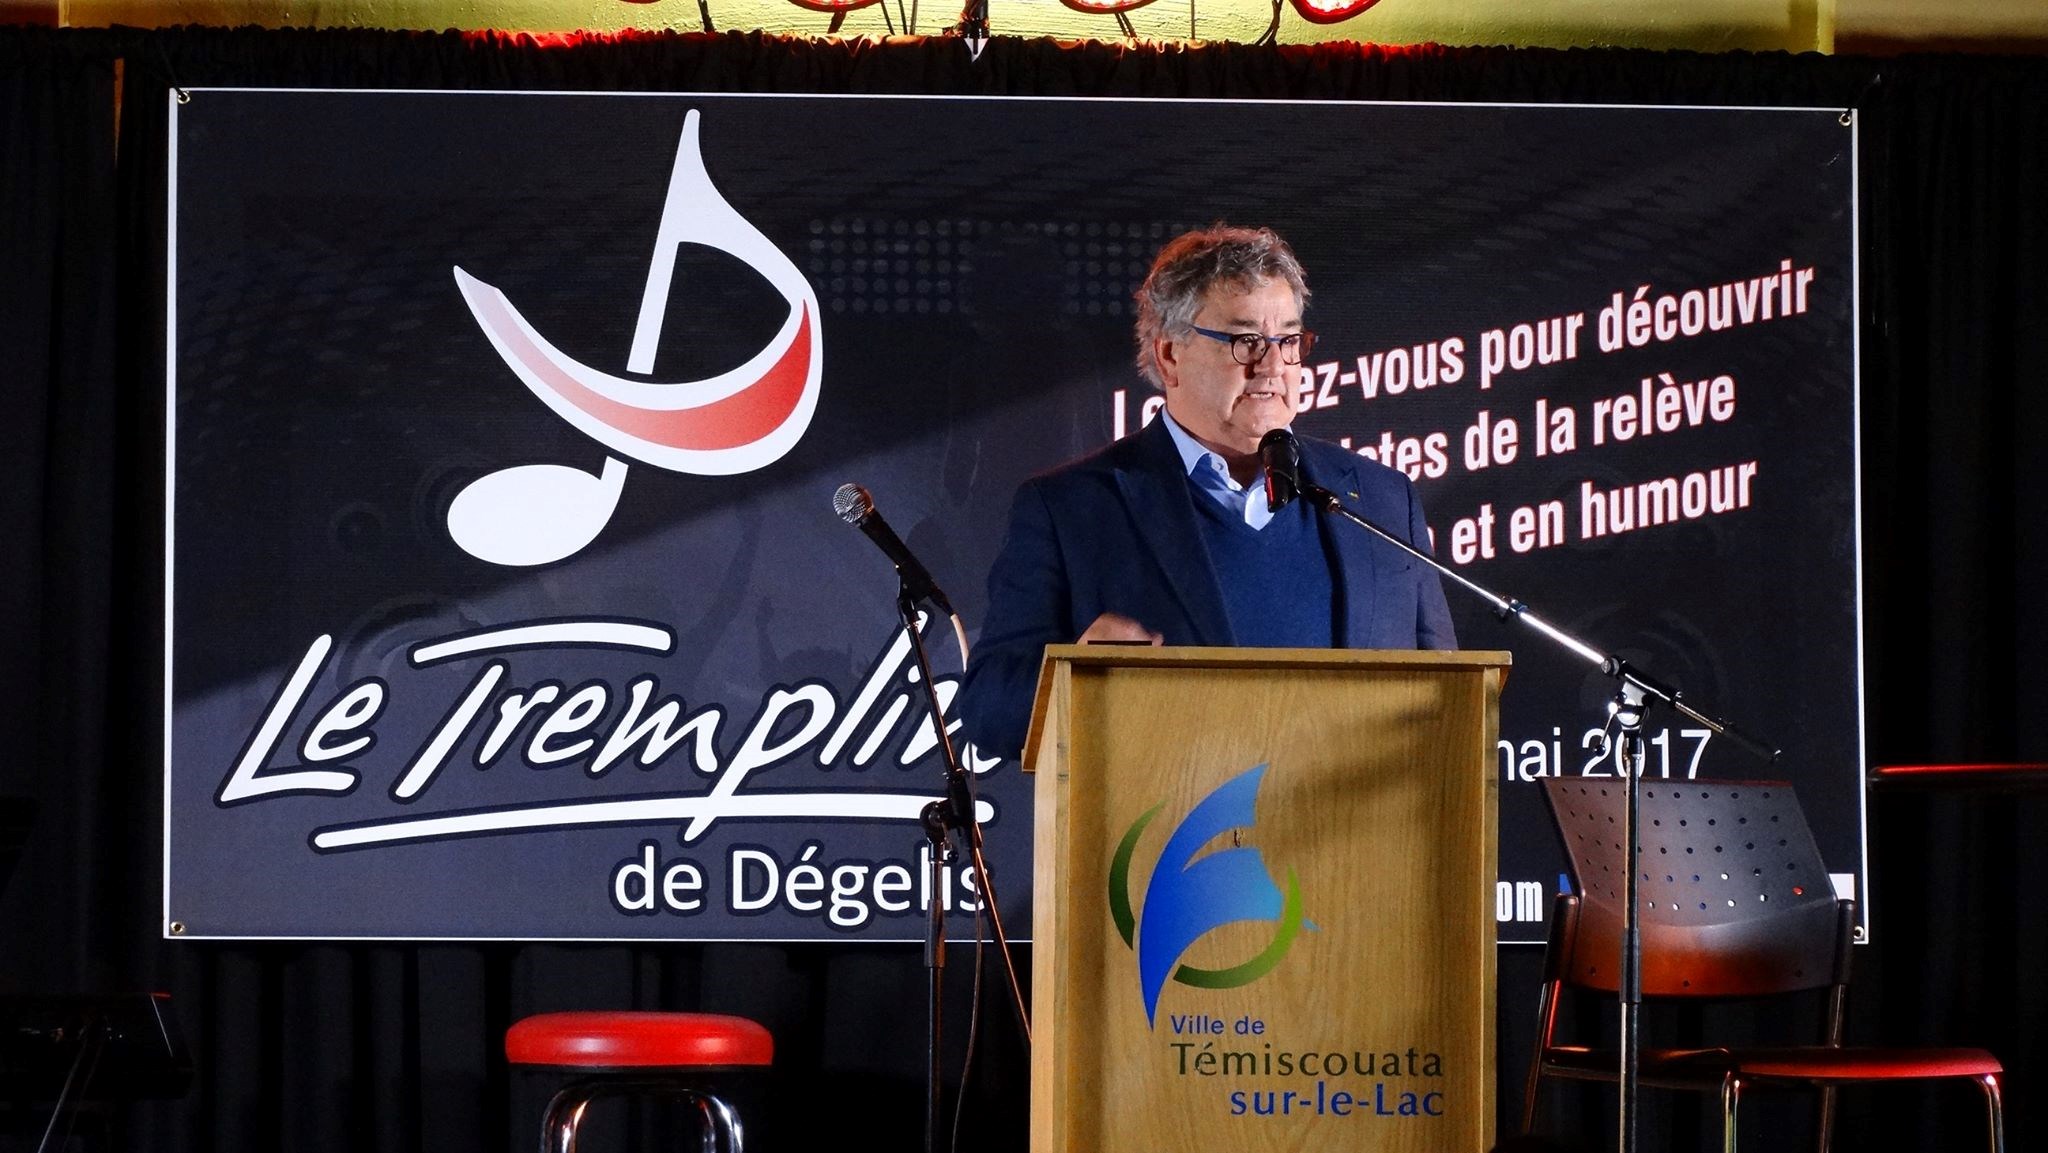 Senator Forest speaks at the Festival le Tremplin de Dégelis, a festival supporting young singers and comedians, in the Témiscouata region in 2017.